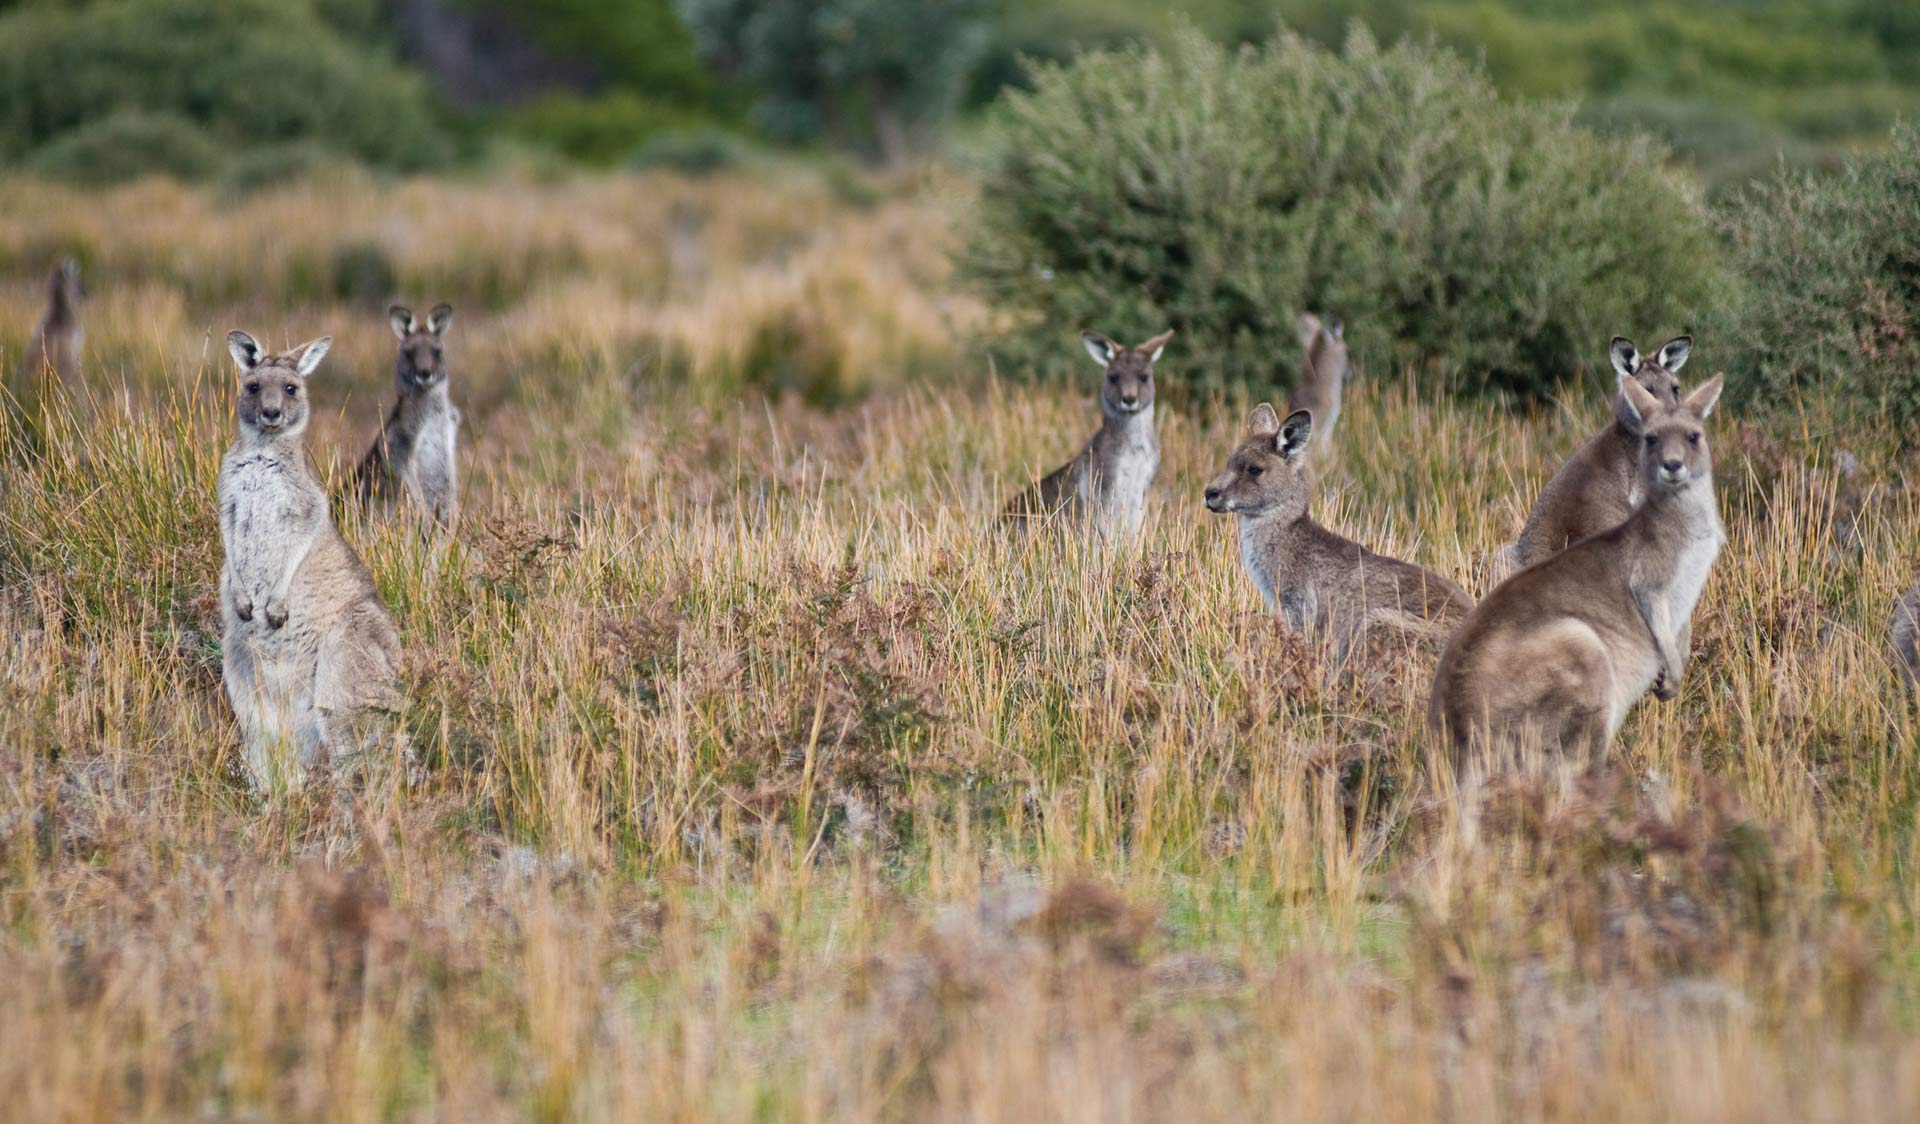 A mob a kangaross look up from eating grass on Wilsons Promontory National Park.